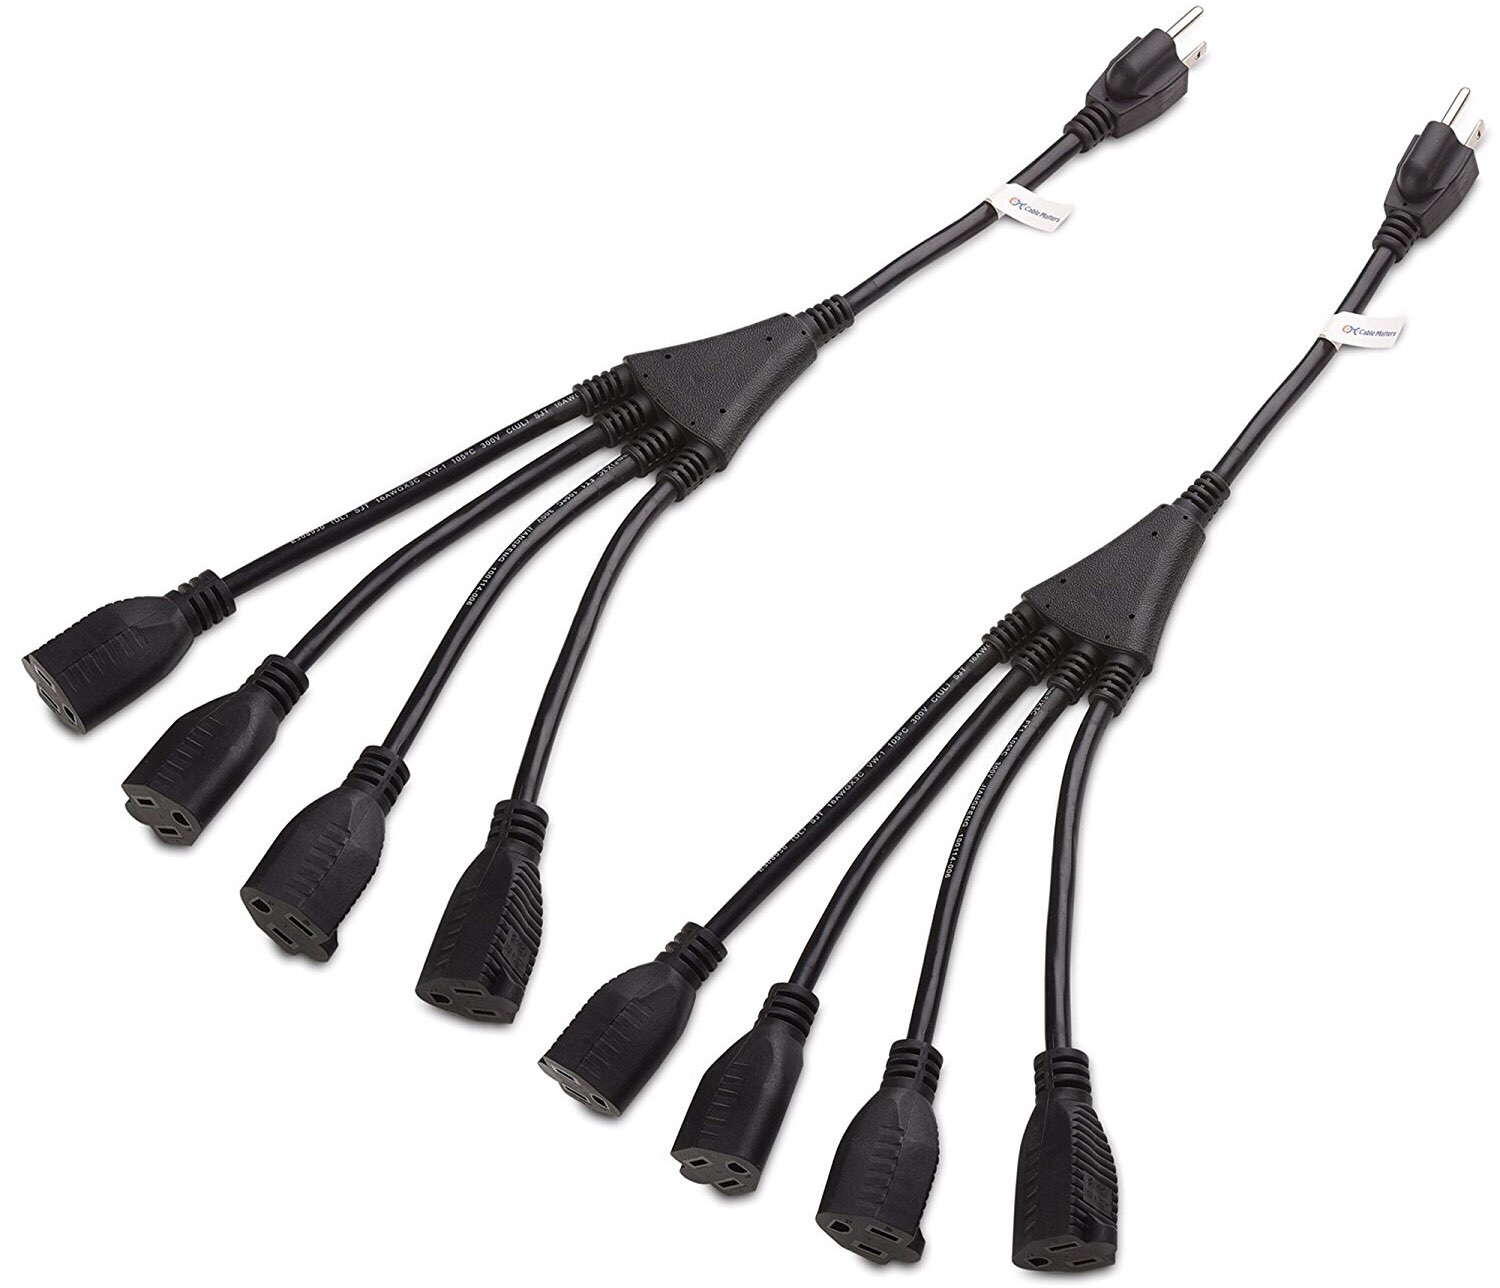 cable-matters-4-outlet-power-splitter-cord-2-pack